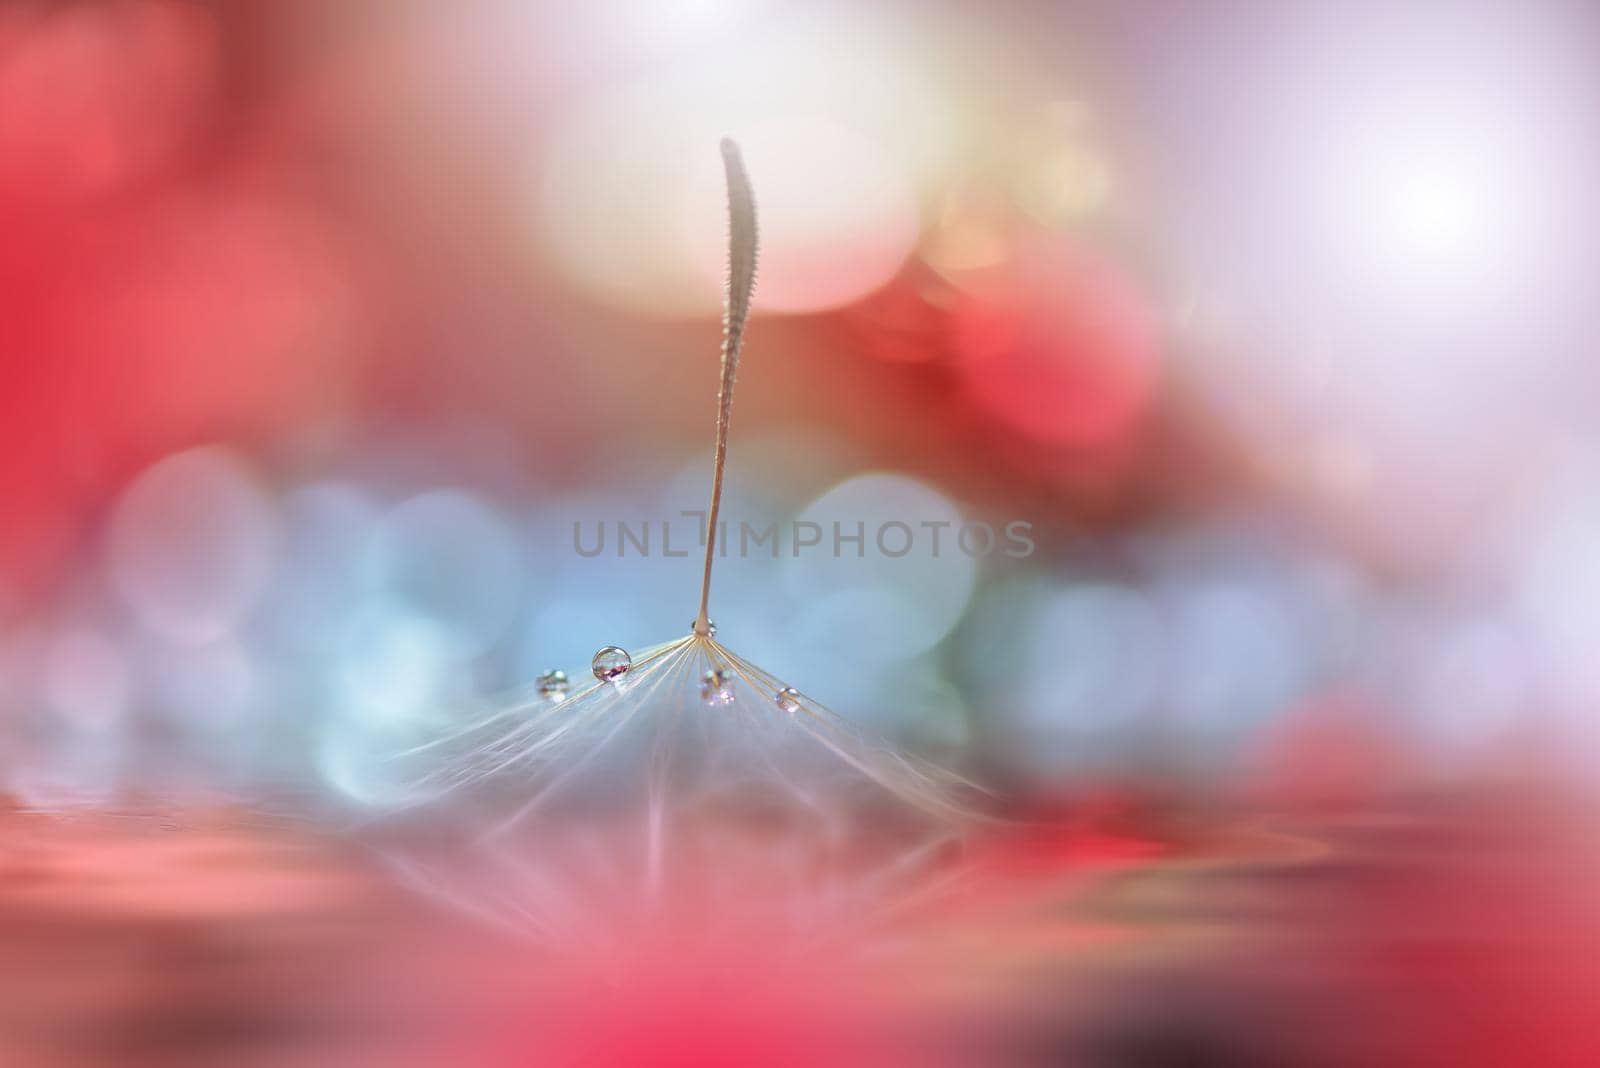 Beautiful Nature Background.Floral Art Design.Abstract Macro Photography.Pastel Flower.Dandelion Flowers.Pink Background.Creative Artistic Wallpaper.Wedding Invitation.Celebration,love.Close up View.Water Drops.Tranquil Natural Background.